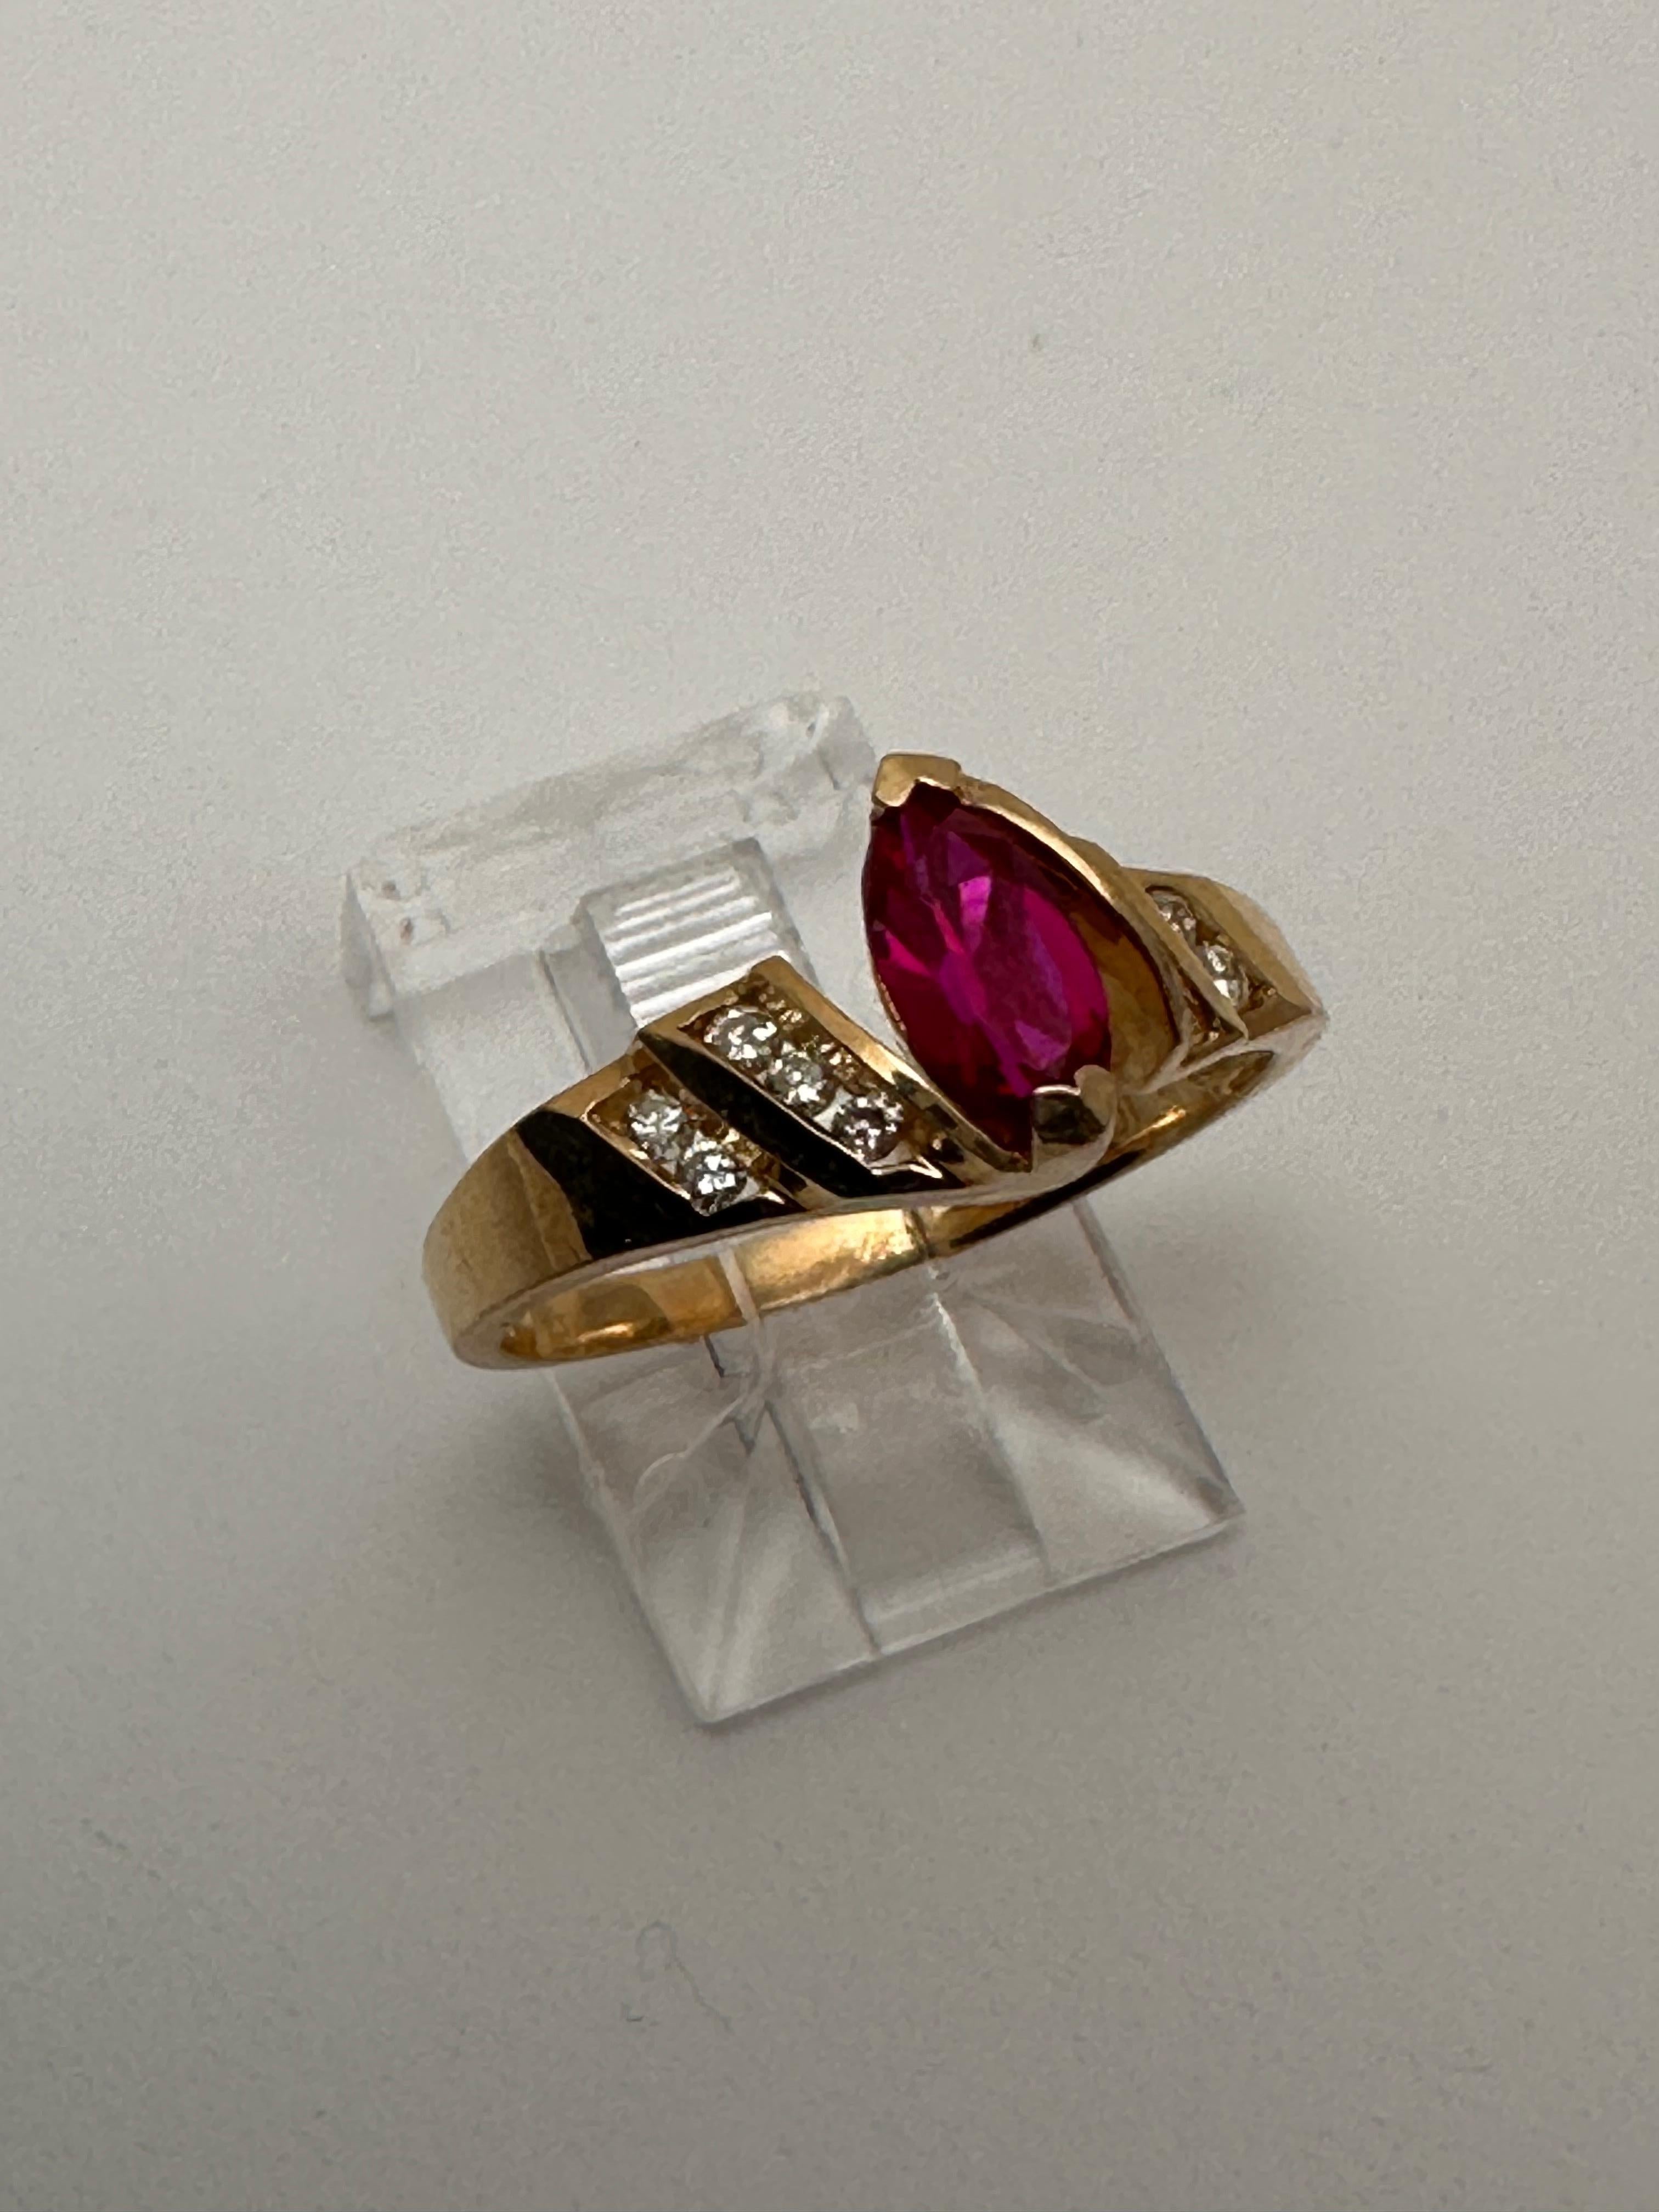 10k Yellow Gold 4 x 8mm Marquise Ruby with 10 Channel Set Diamonds Ring Size 7 In New Condition For Sale In Las Vegas, NV